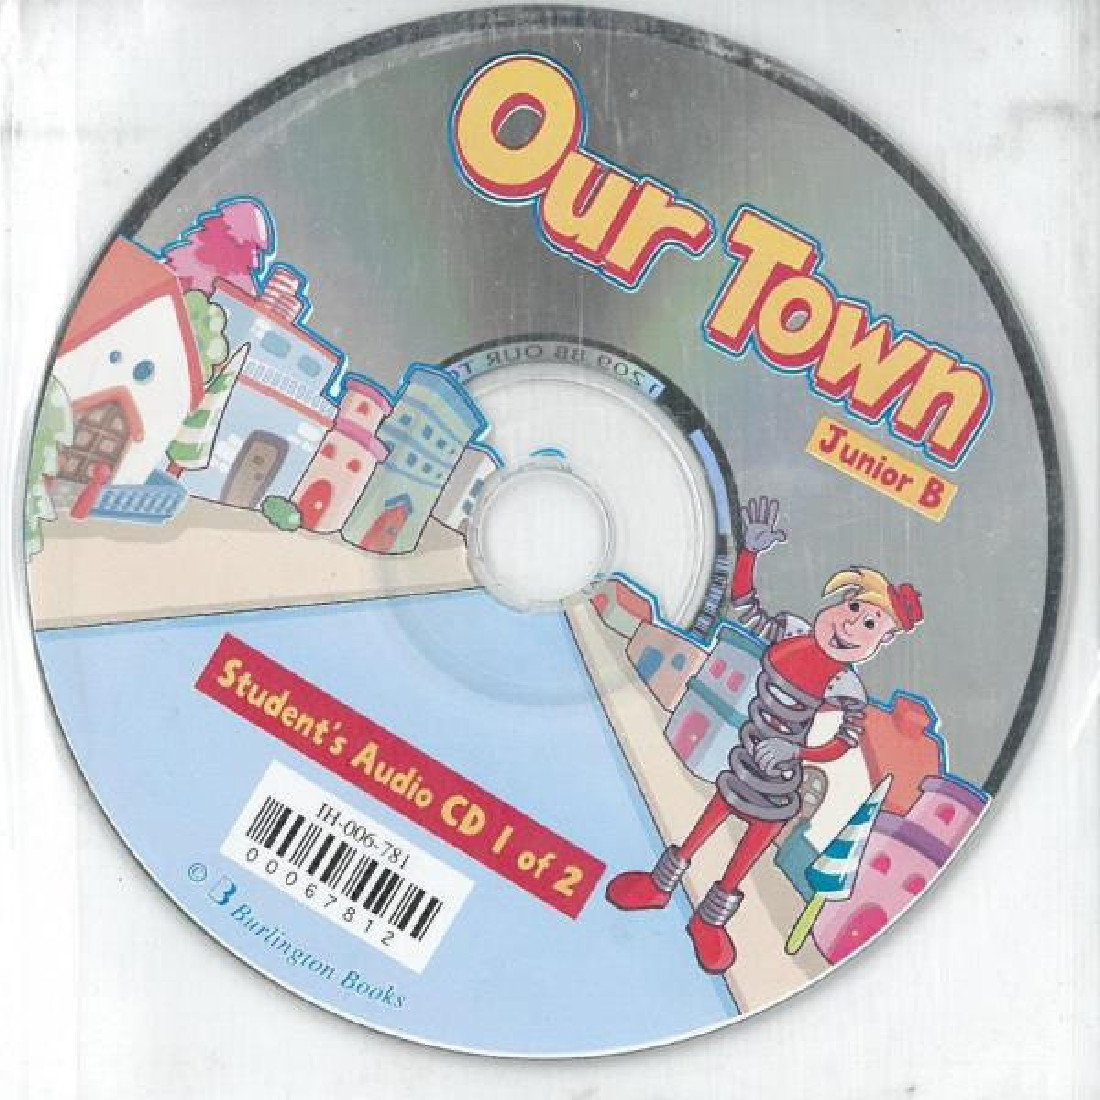 OUR TOWN JUNIOR B STUDENTS AUDIO CDs